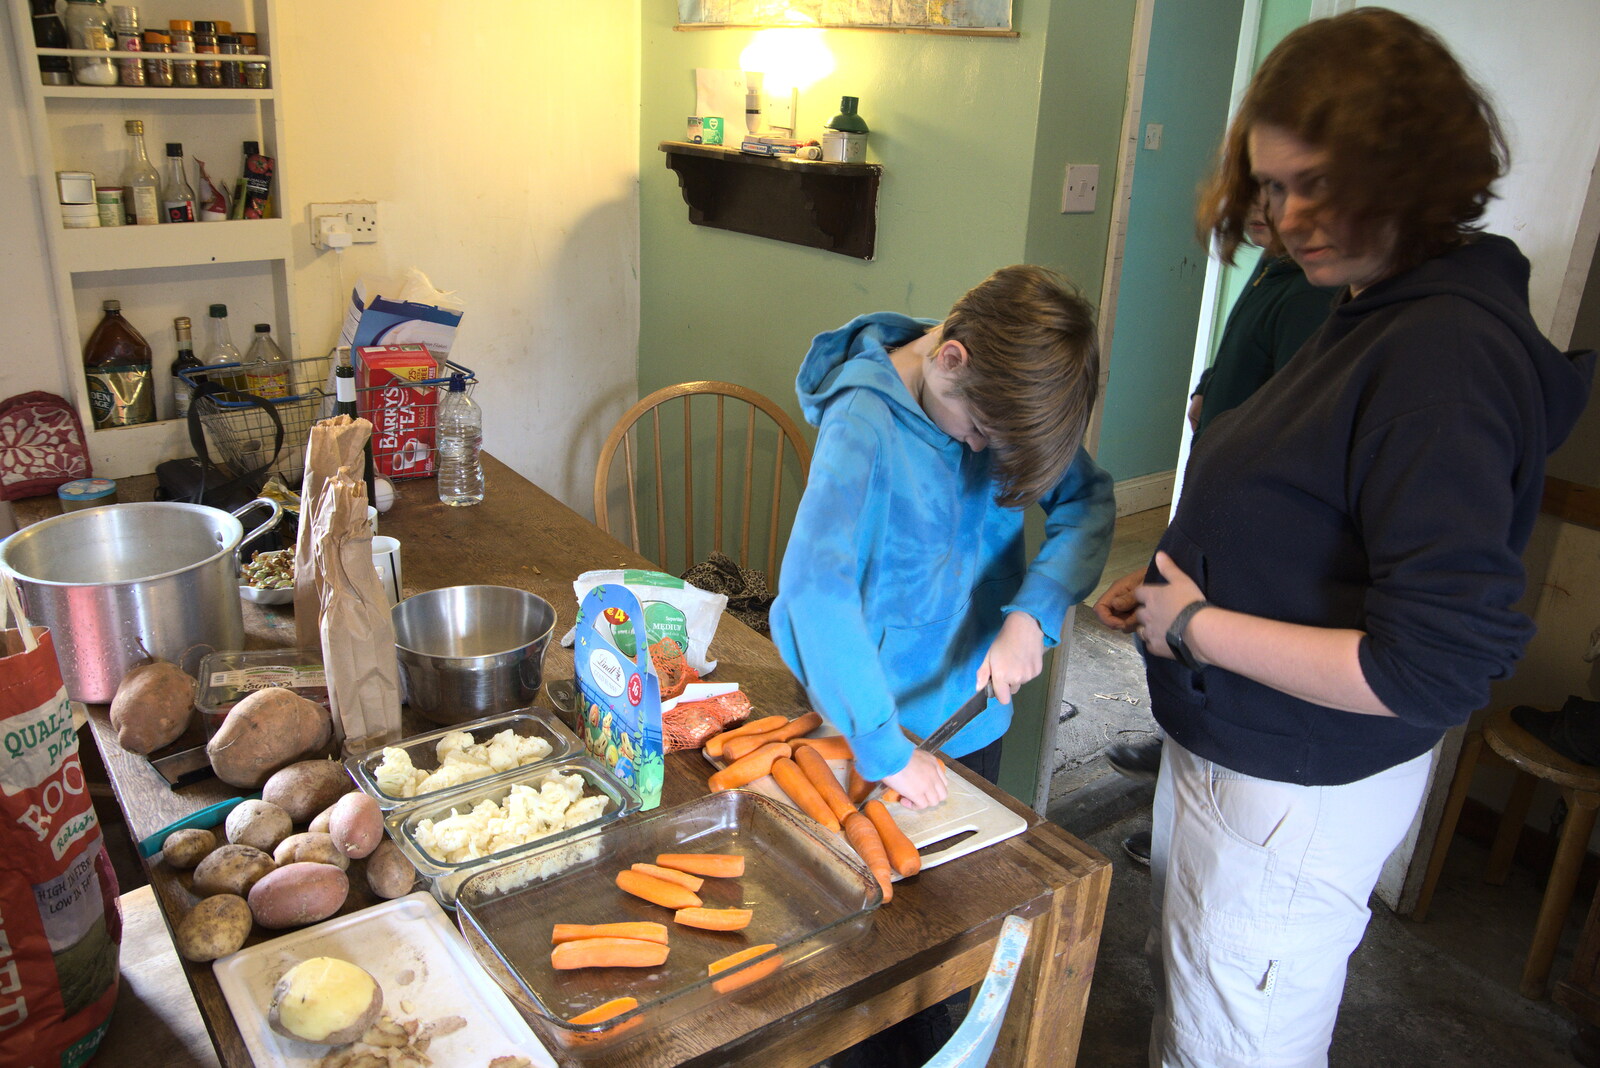 Harry chops up some carrots for lunch from Manorhamilton and Bundoran, Leitrim and Donegal, Ireland - 16th April 2022